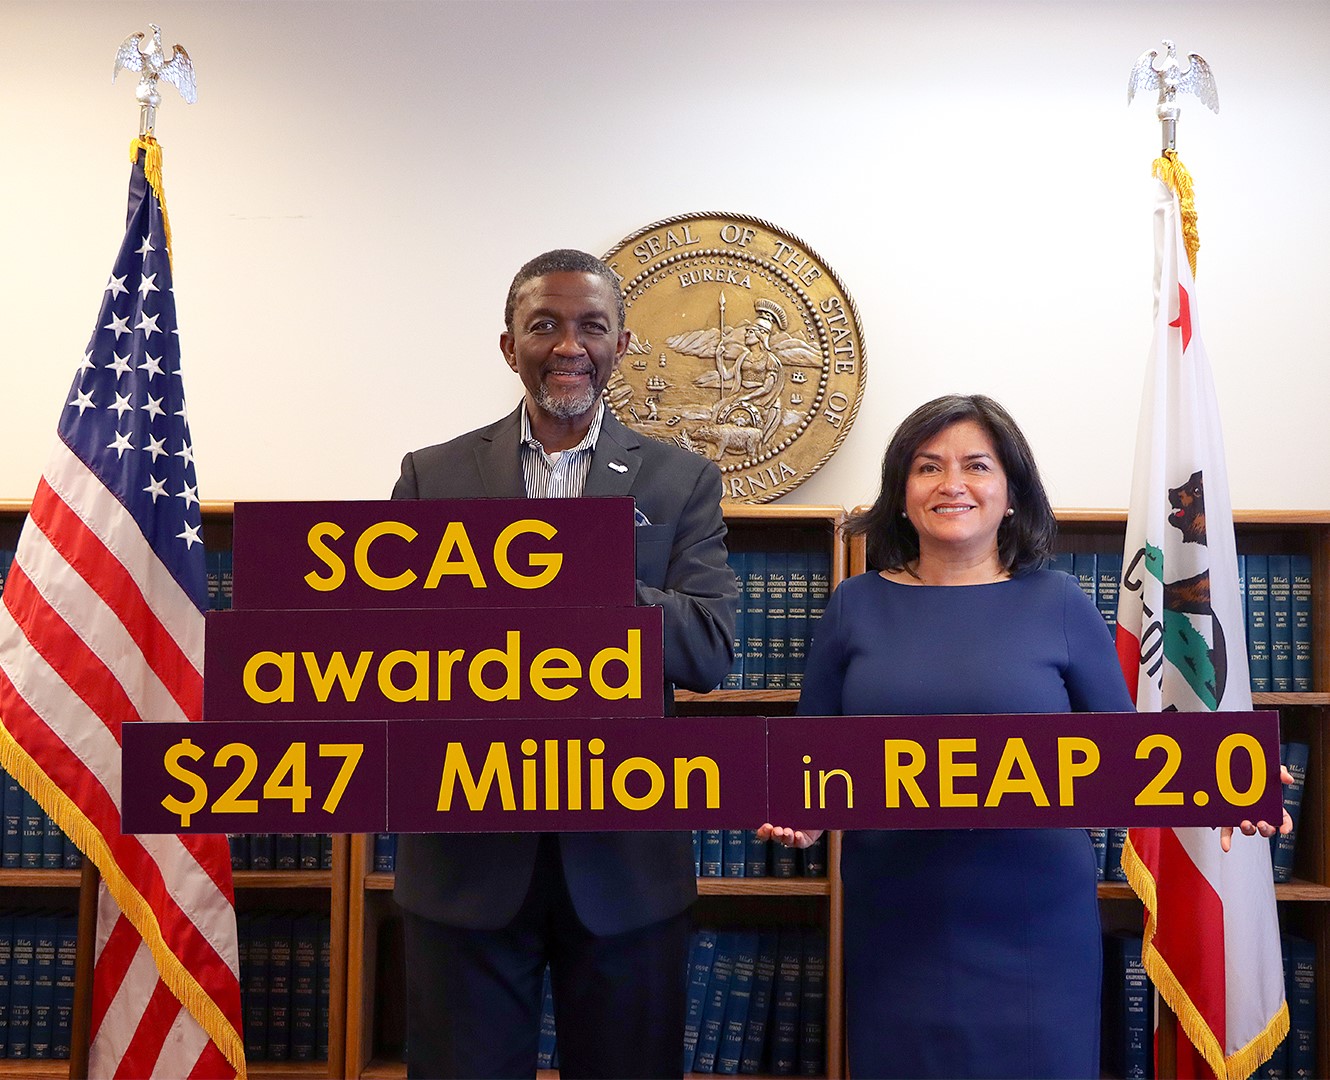 BCSH Secretary Lourdes Castro Ramírez and SCAG Director Kome Asije mark the historic investment in the SCAG region to build more climate friendly housing in areas that will reduce car-dependency and meet our state housing goals.